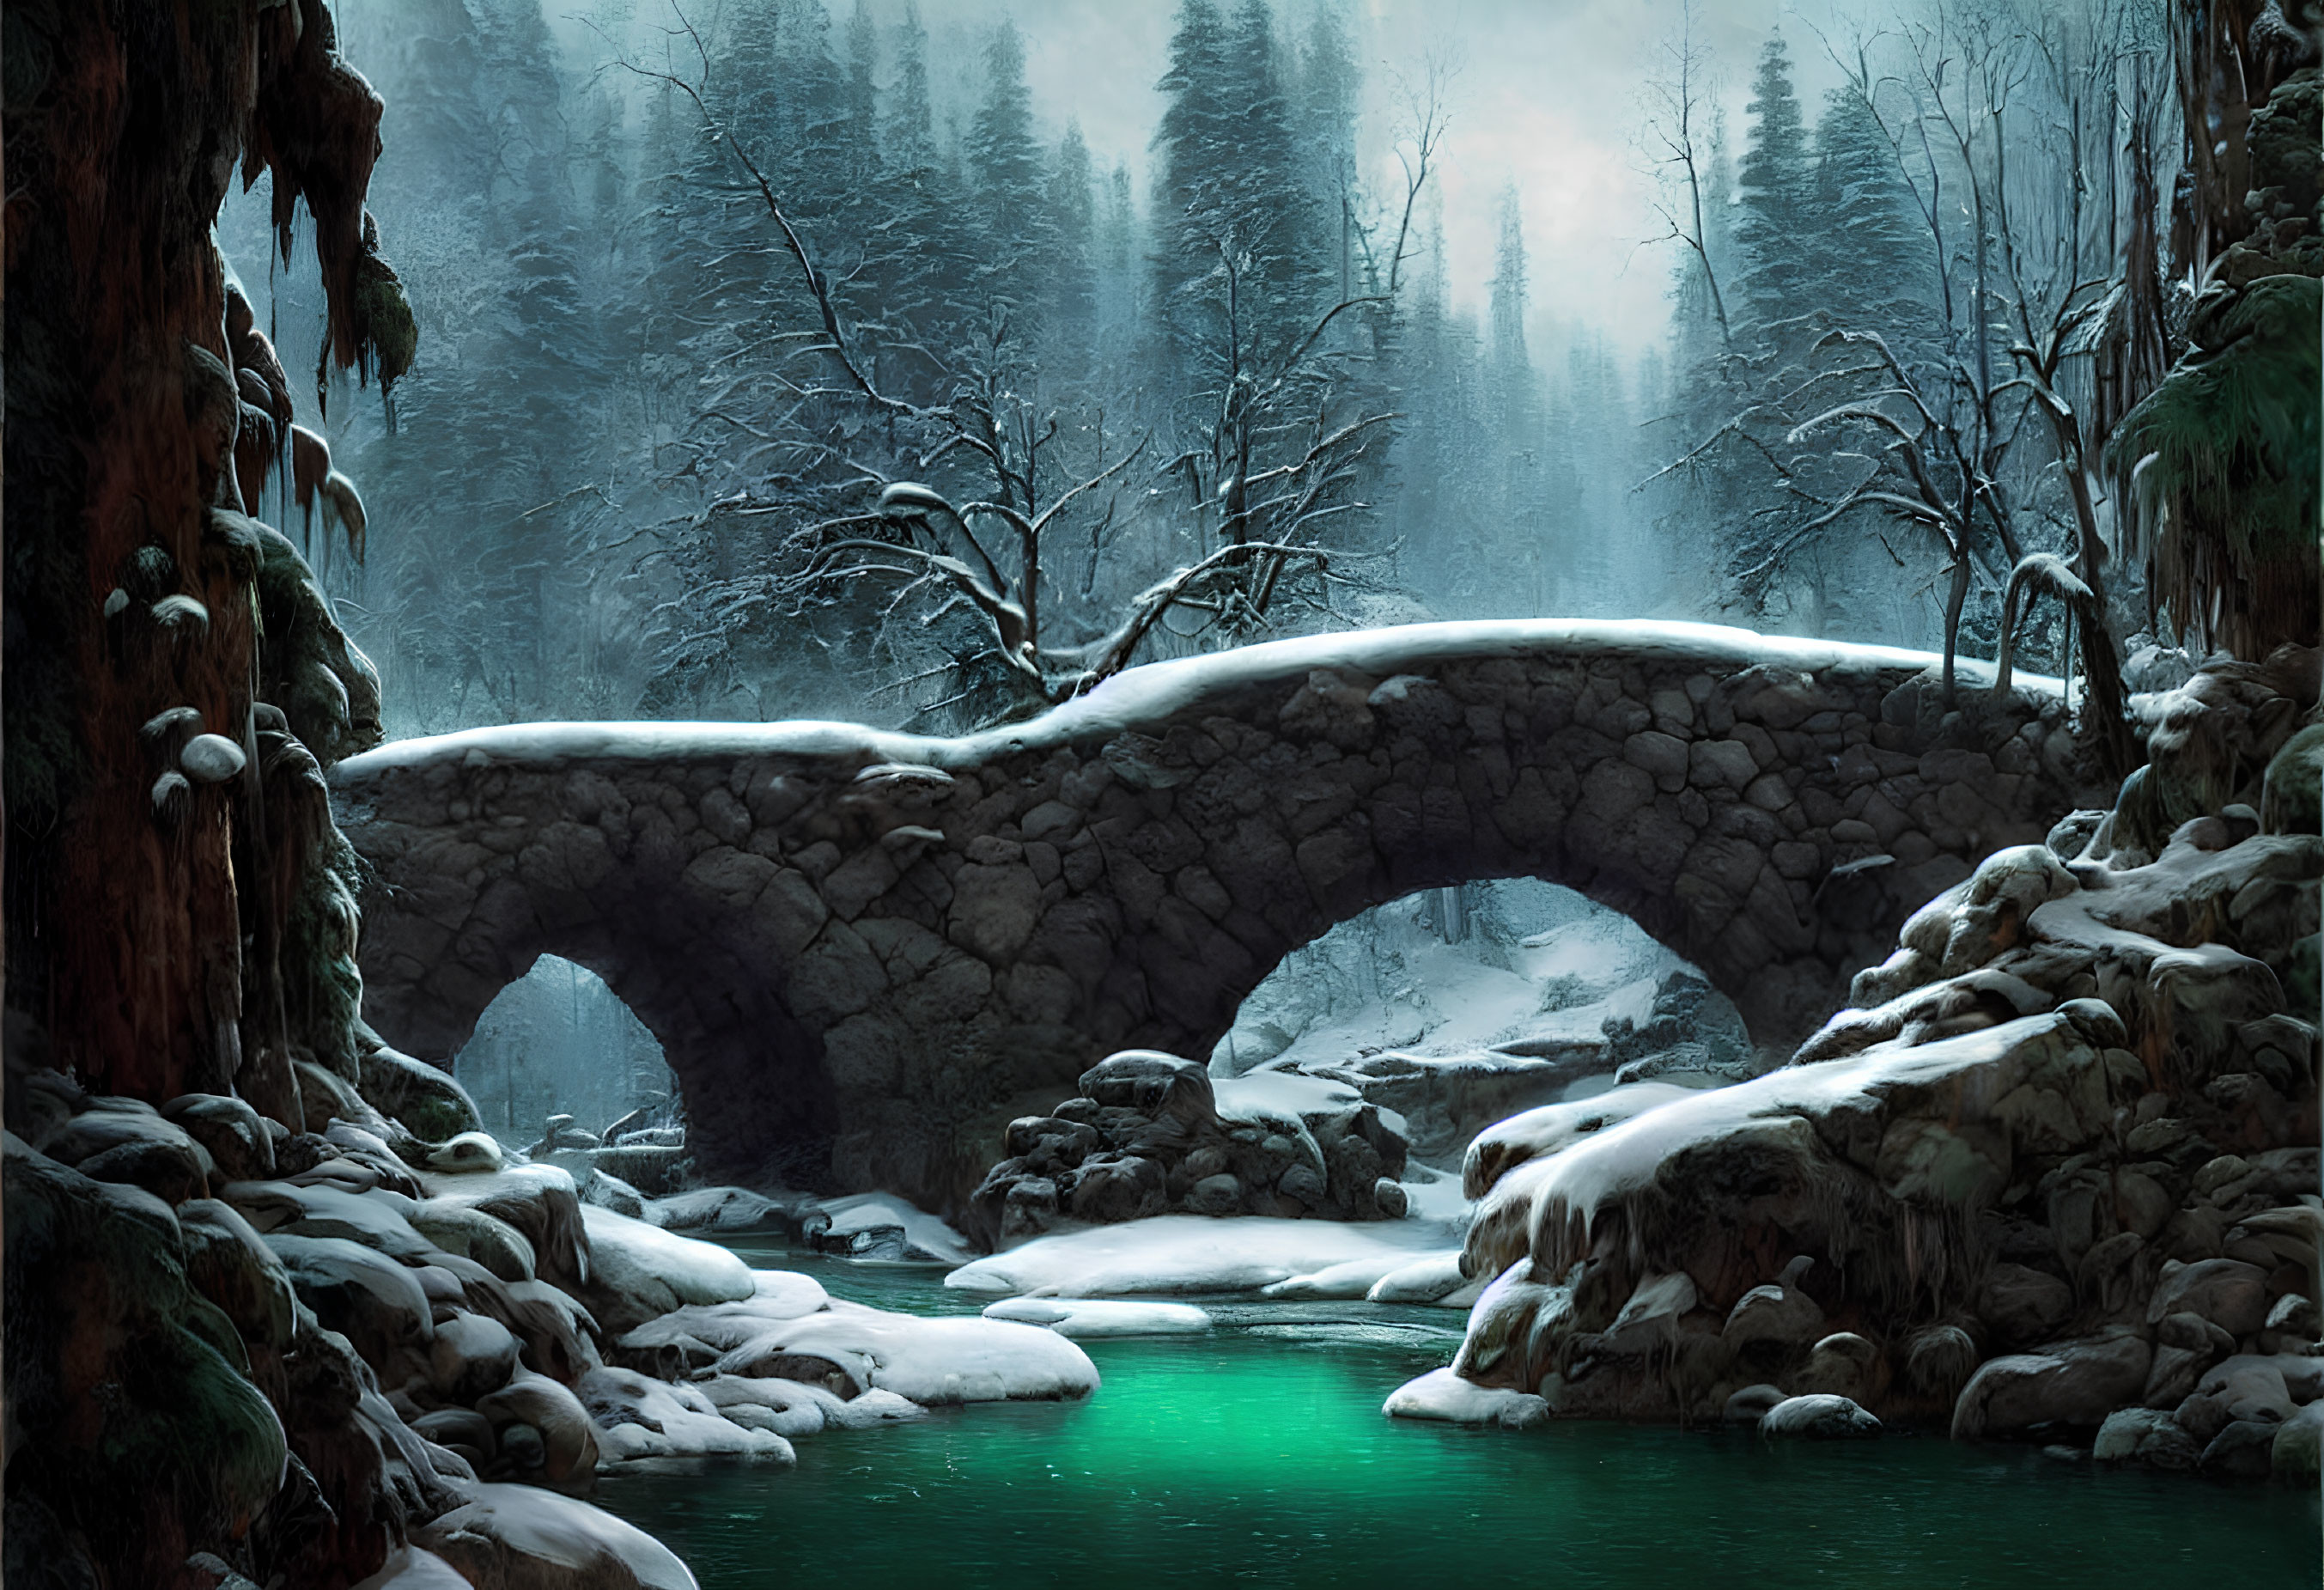 Snowy Forest Scene: Old Stone Bridge Over Tranquil River